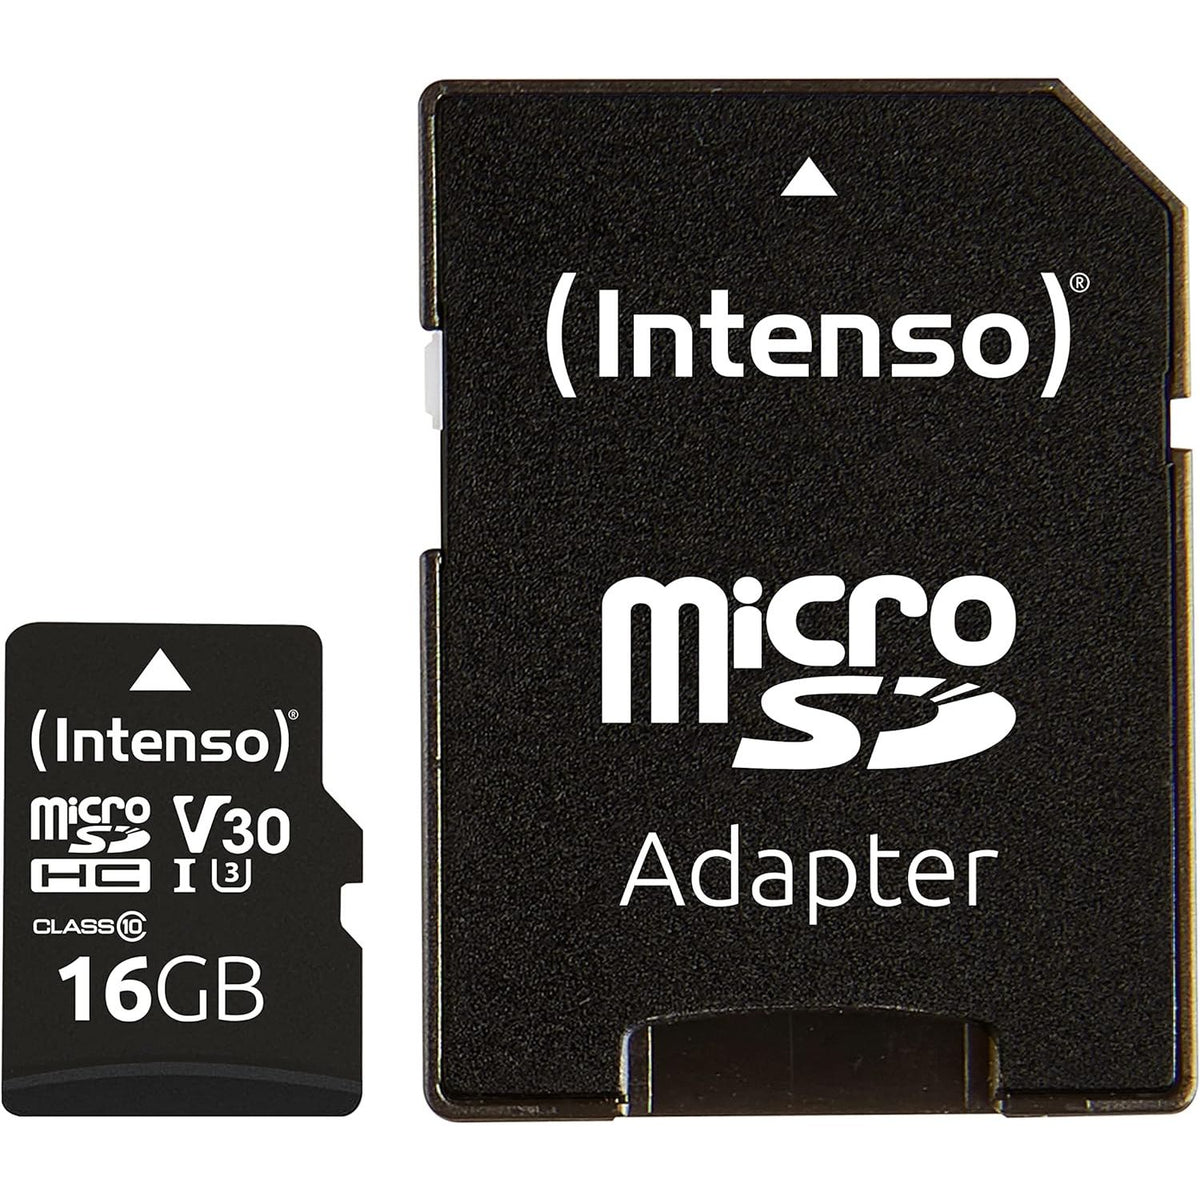 Intenso MicroSD UHS-I Class 10 16GB Memory Card - Black | 3433470 from Intenso - DID Electrical